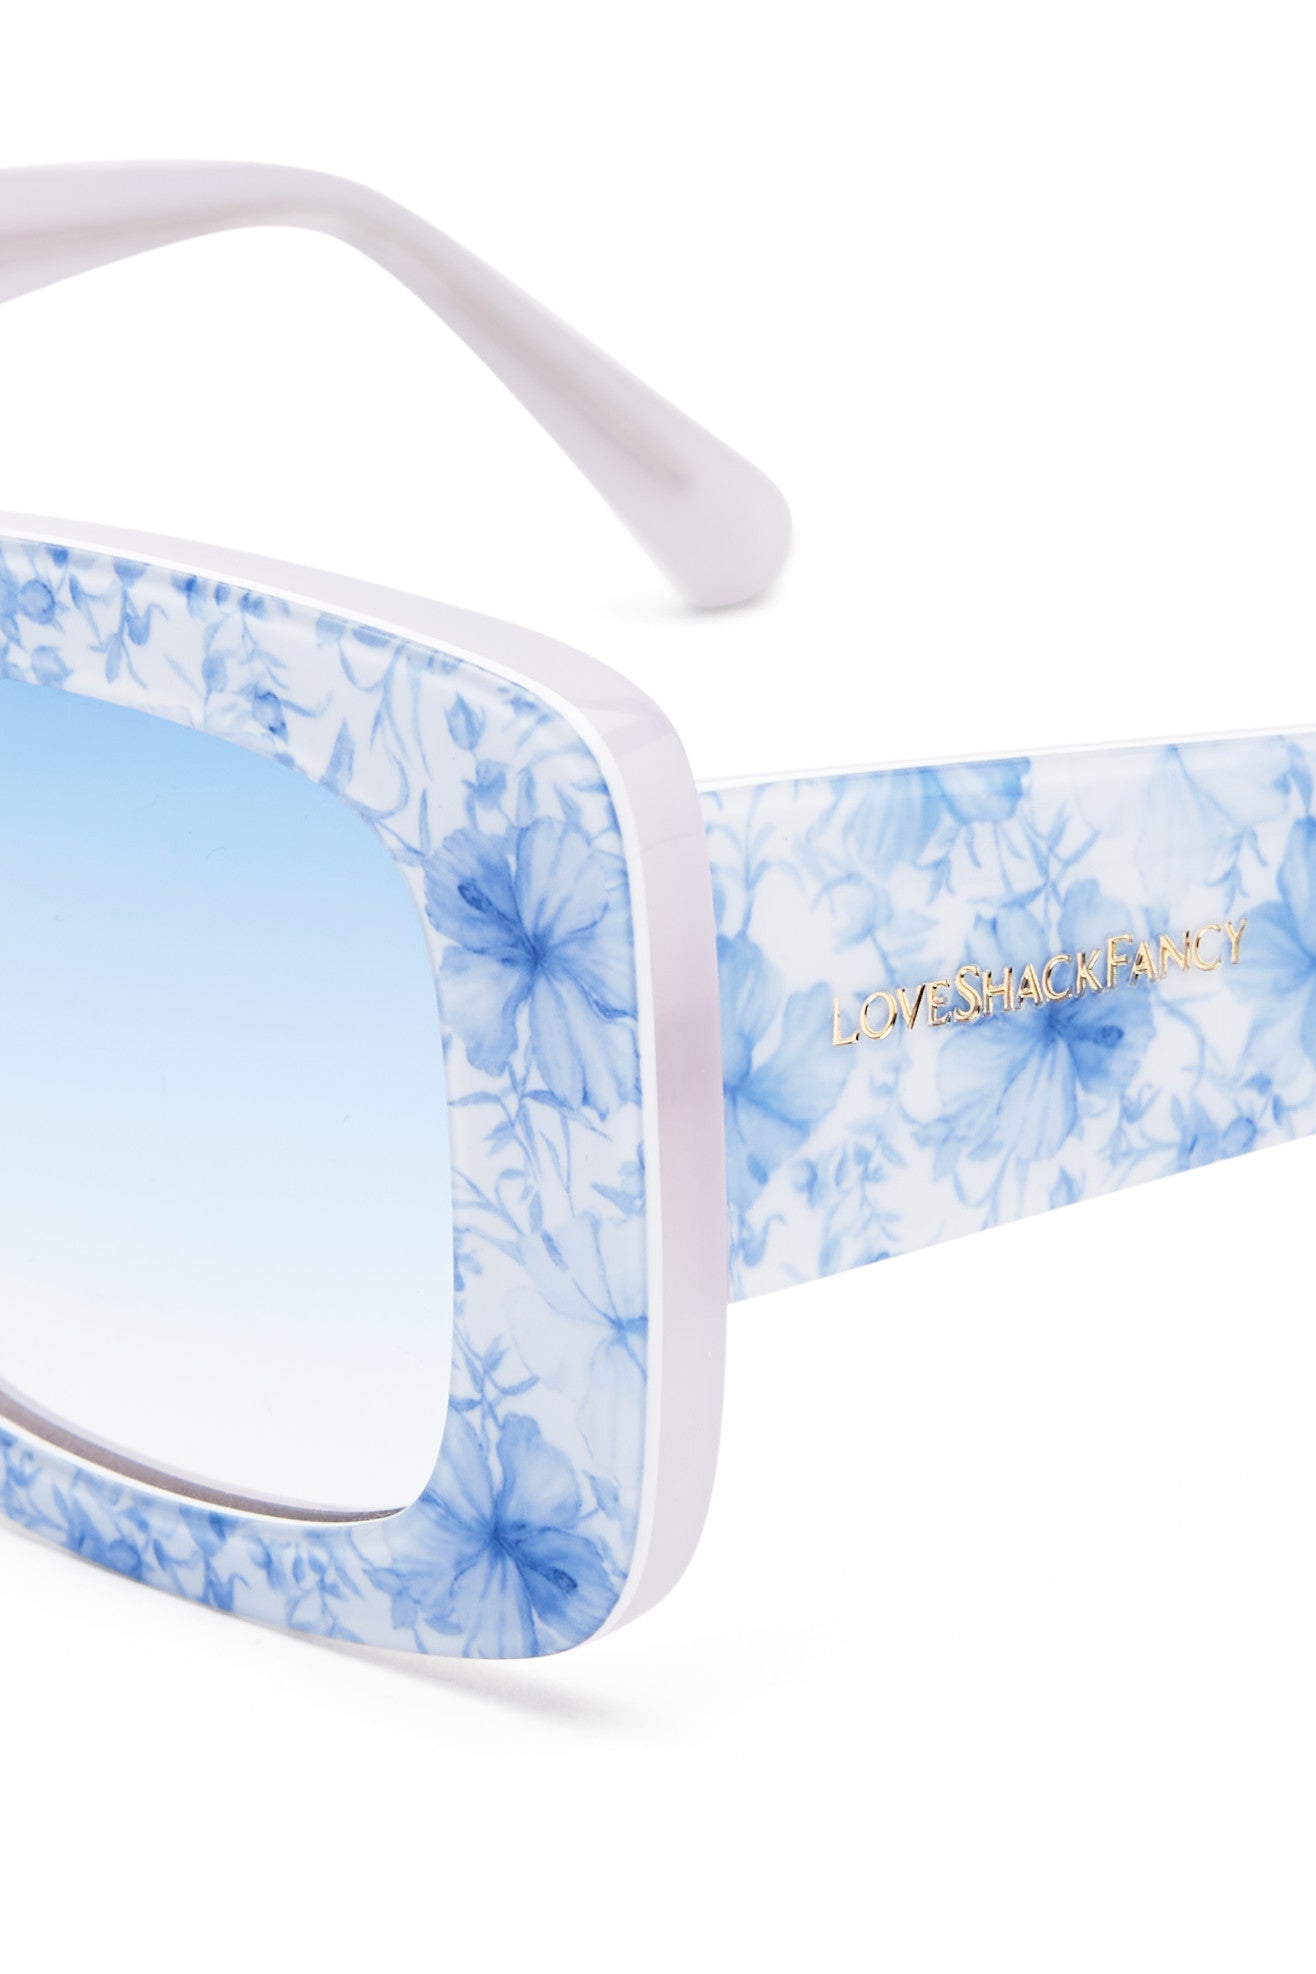 Womens square printed sunglasses clearwaters